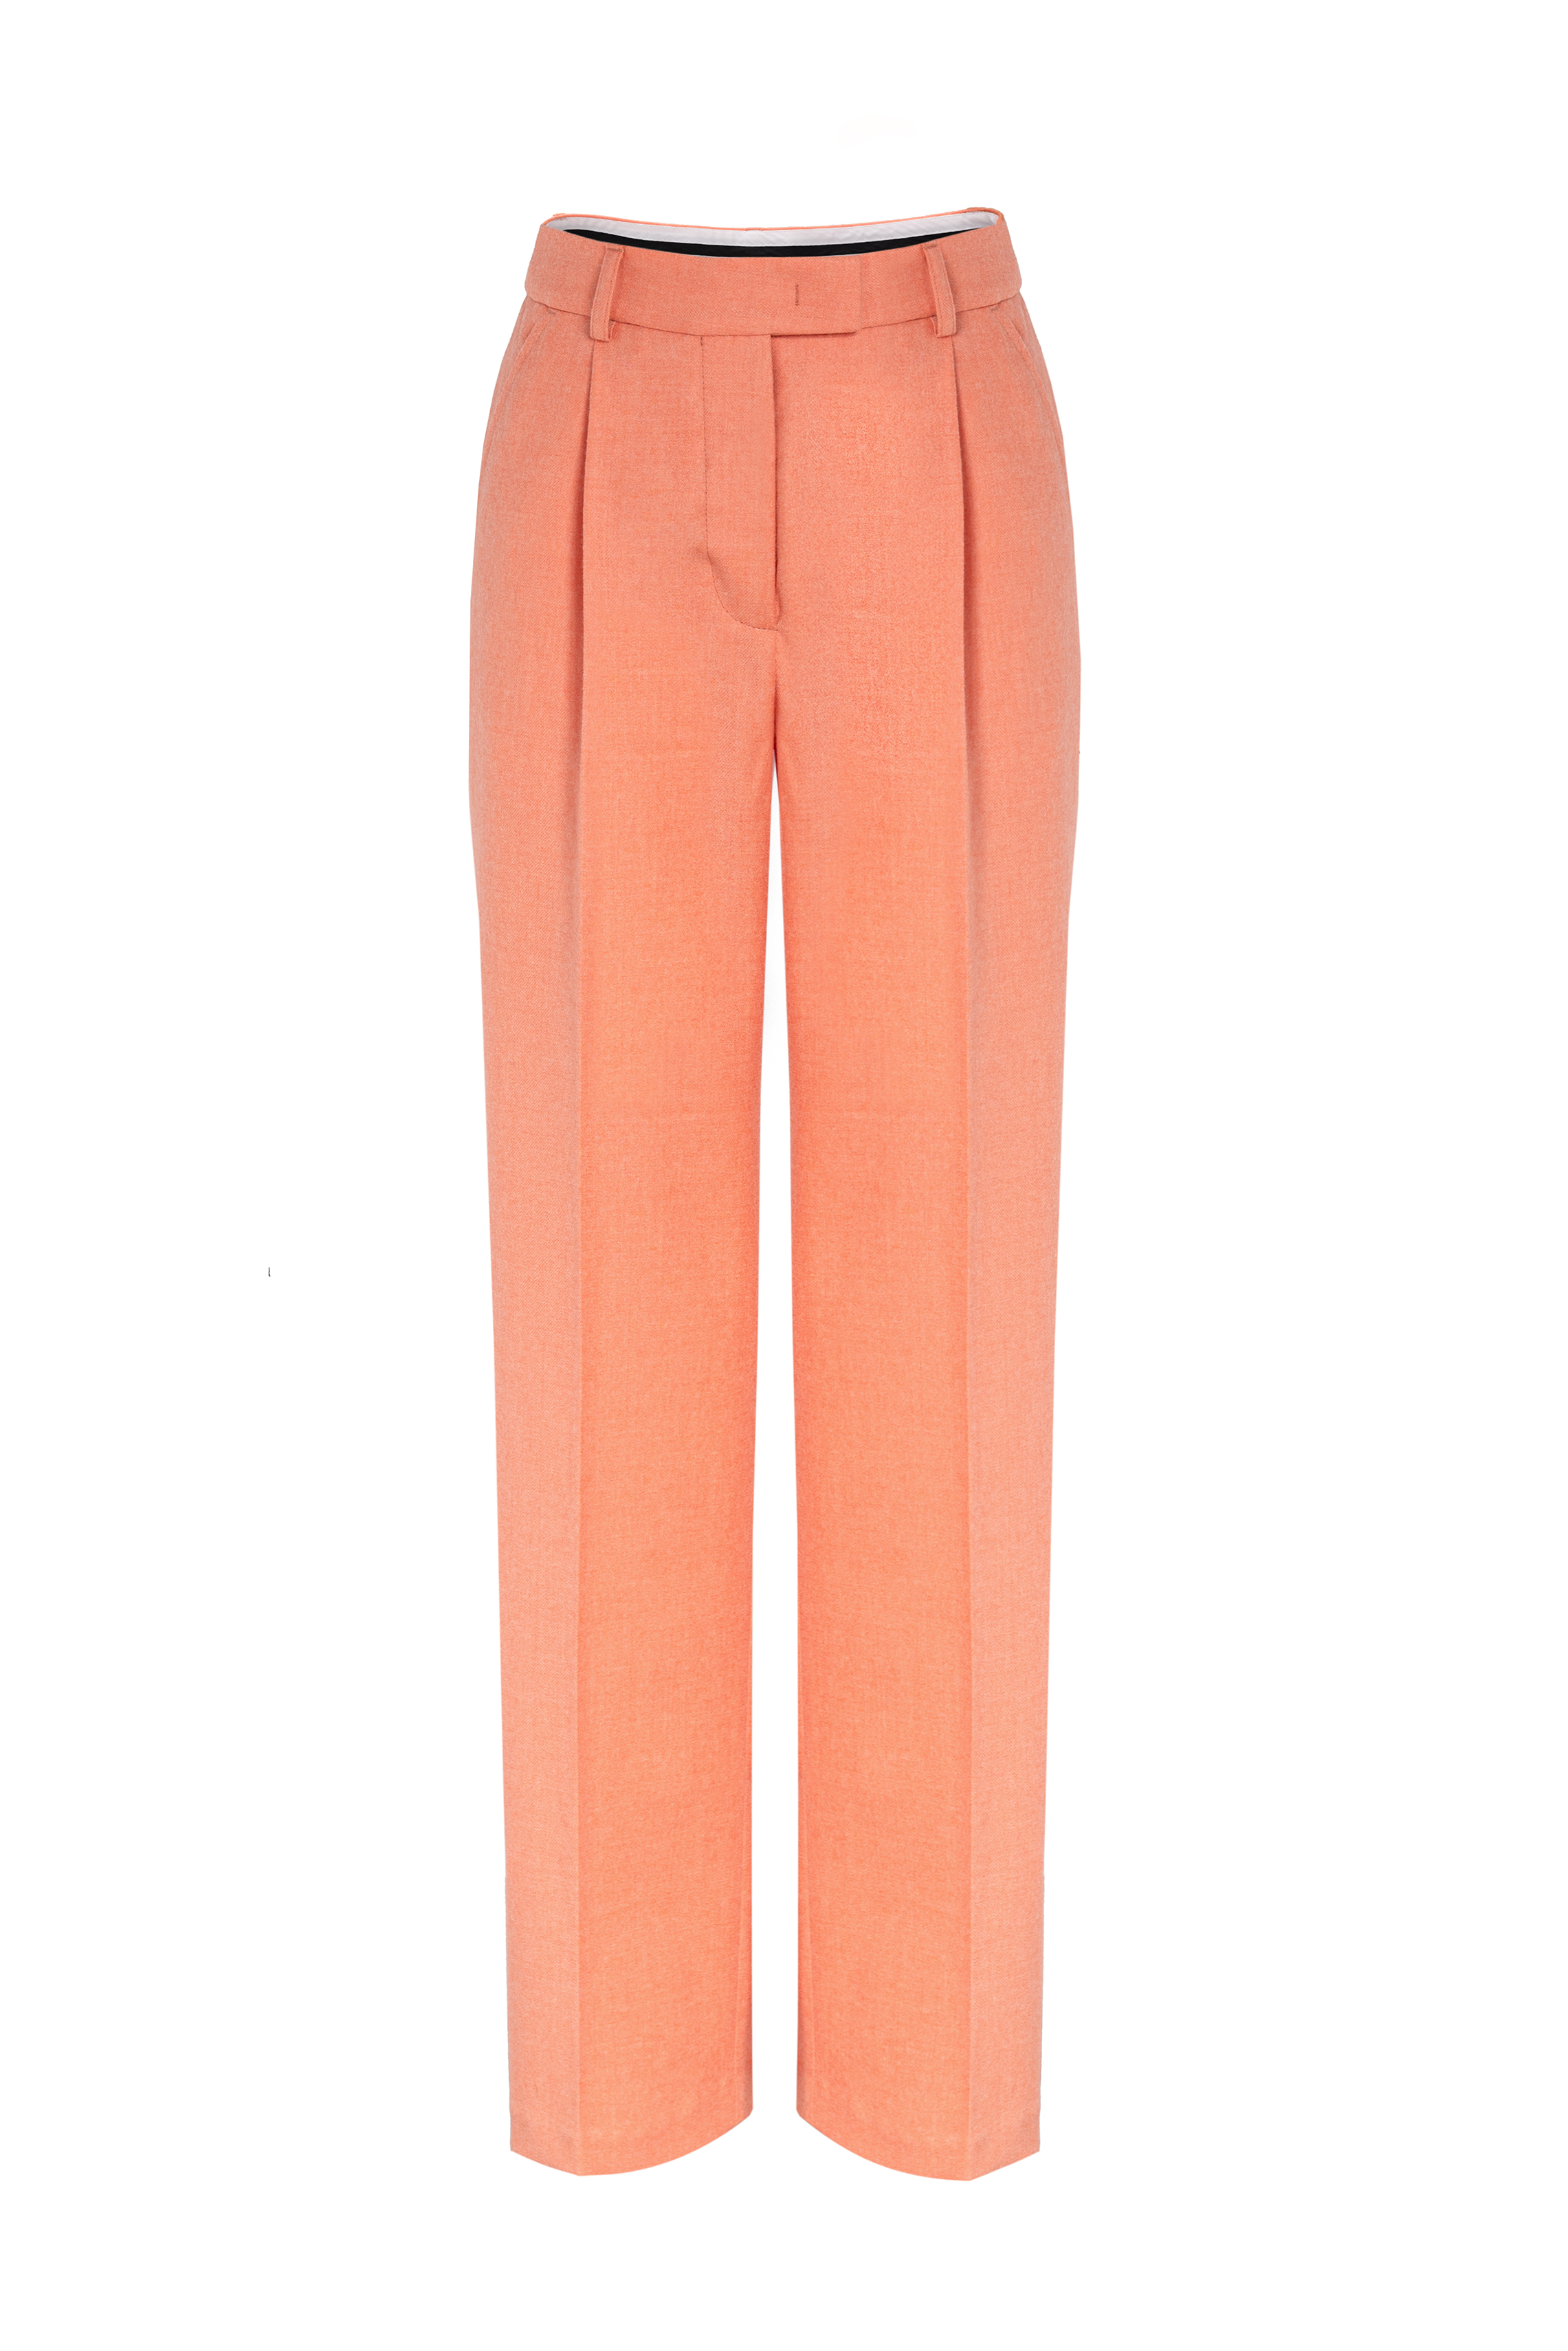 Suit 5049-169 Peach from BRUSNiKA